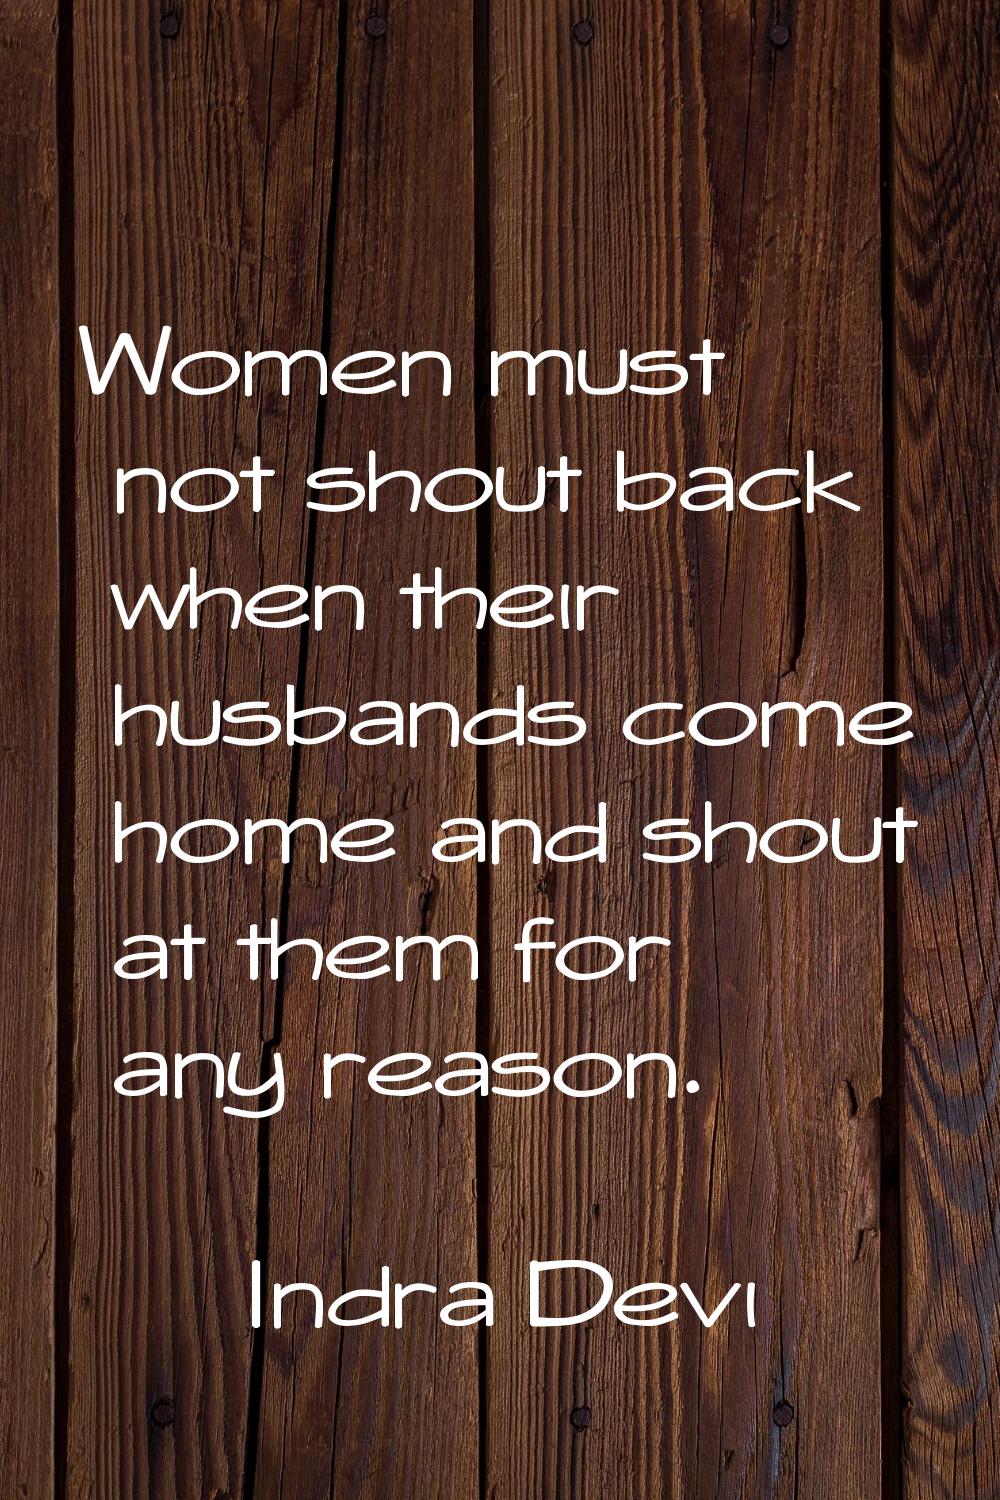 Women must not shout back when their husbands come home and shout at them for any reason.